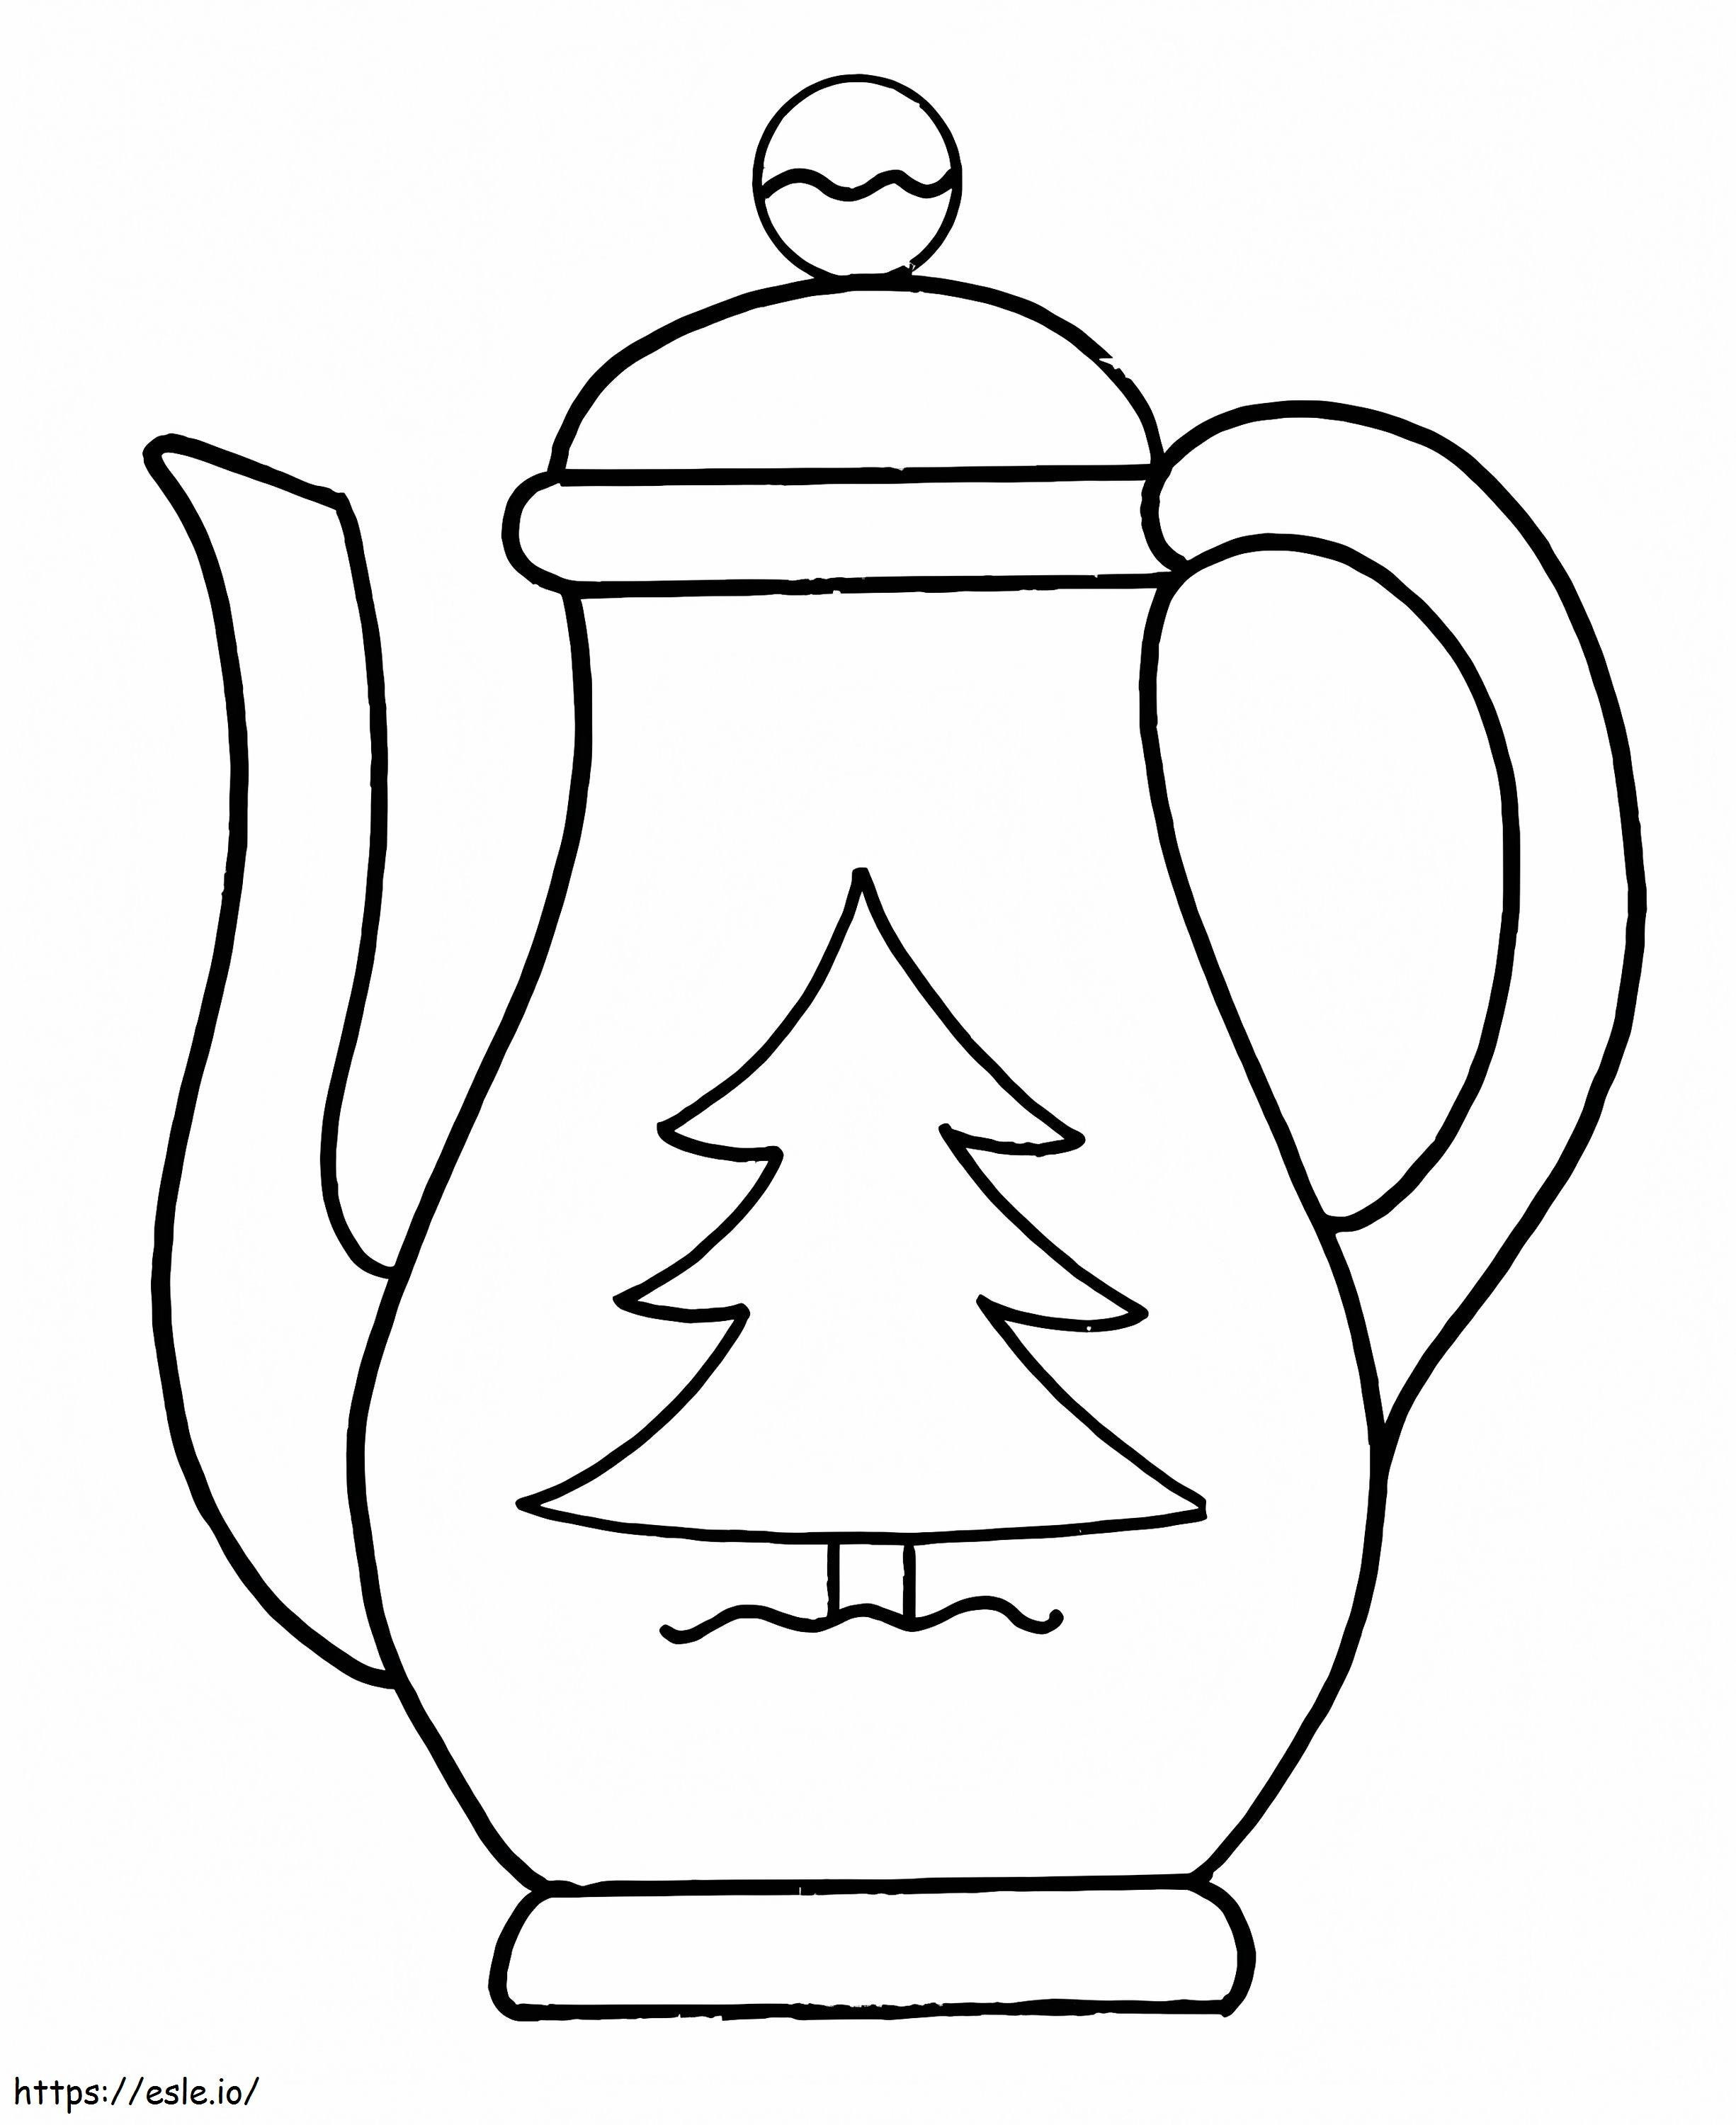 Teapot With Pine Tree coloring page